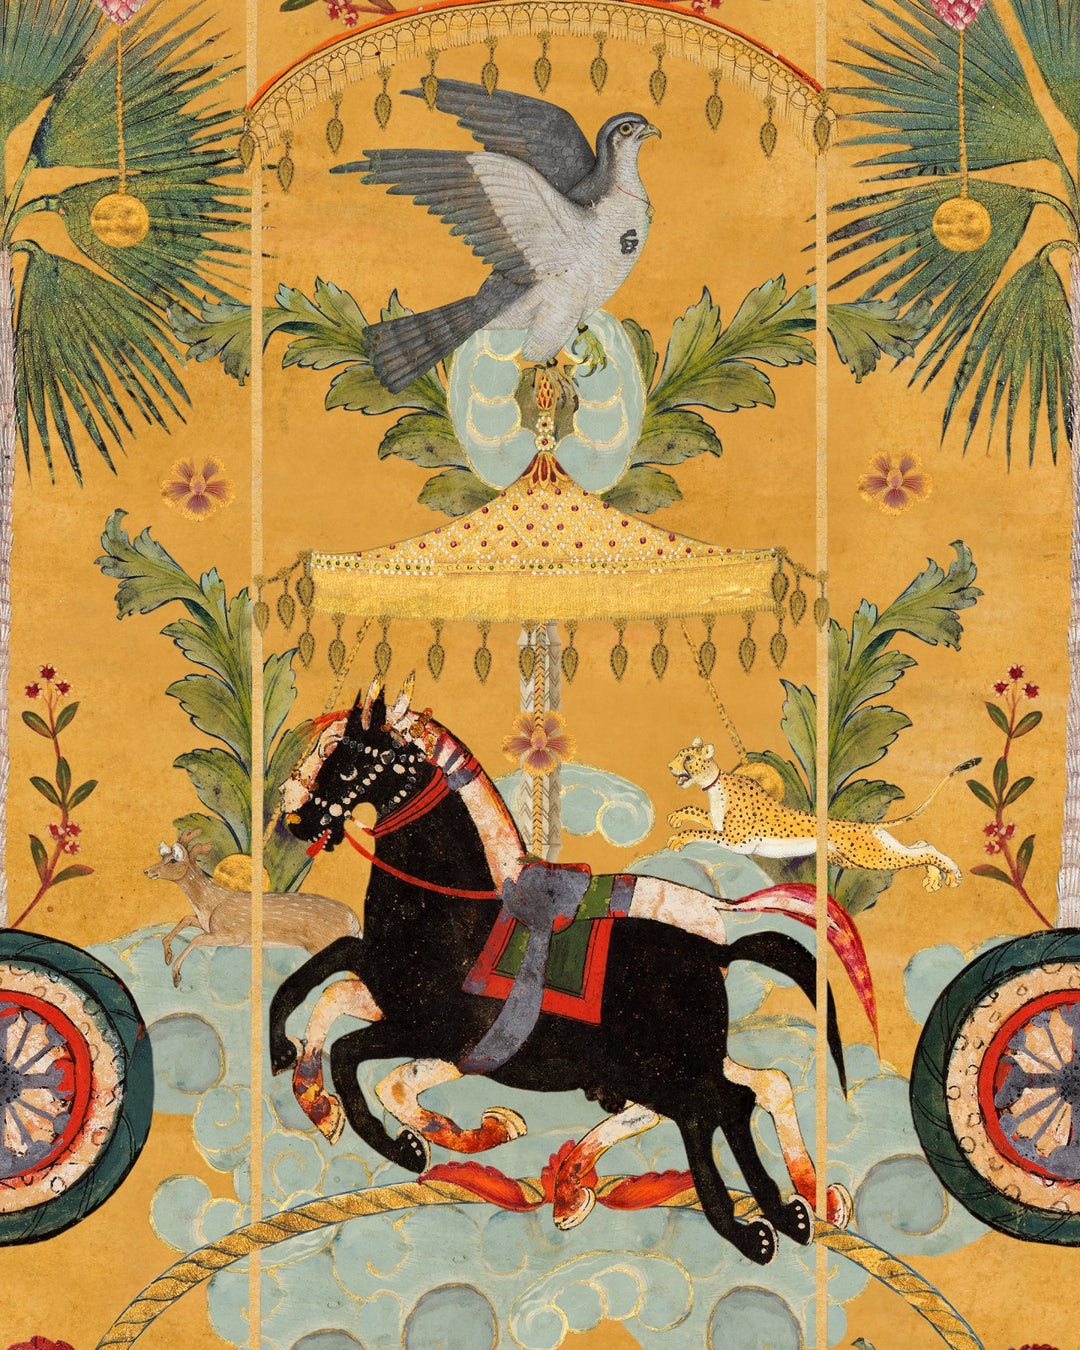 Mind-the-gap-tales-of-Maghreb-collection-wallpaper-Yennayer-amber-print-pracing-horses-decorations-birds-beasts-carnival-wallpaper-print-Indian-Themed-